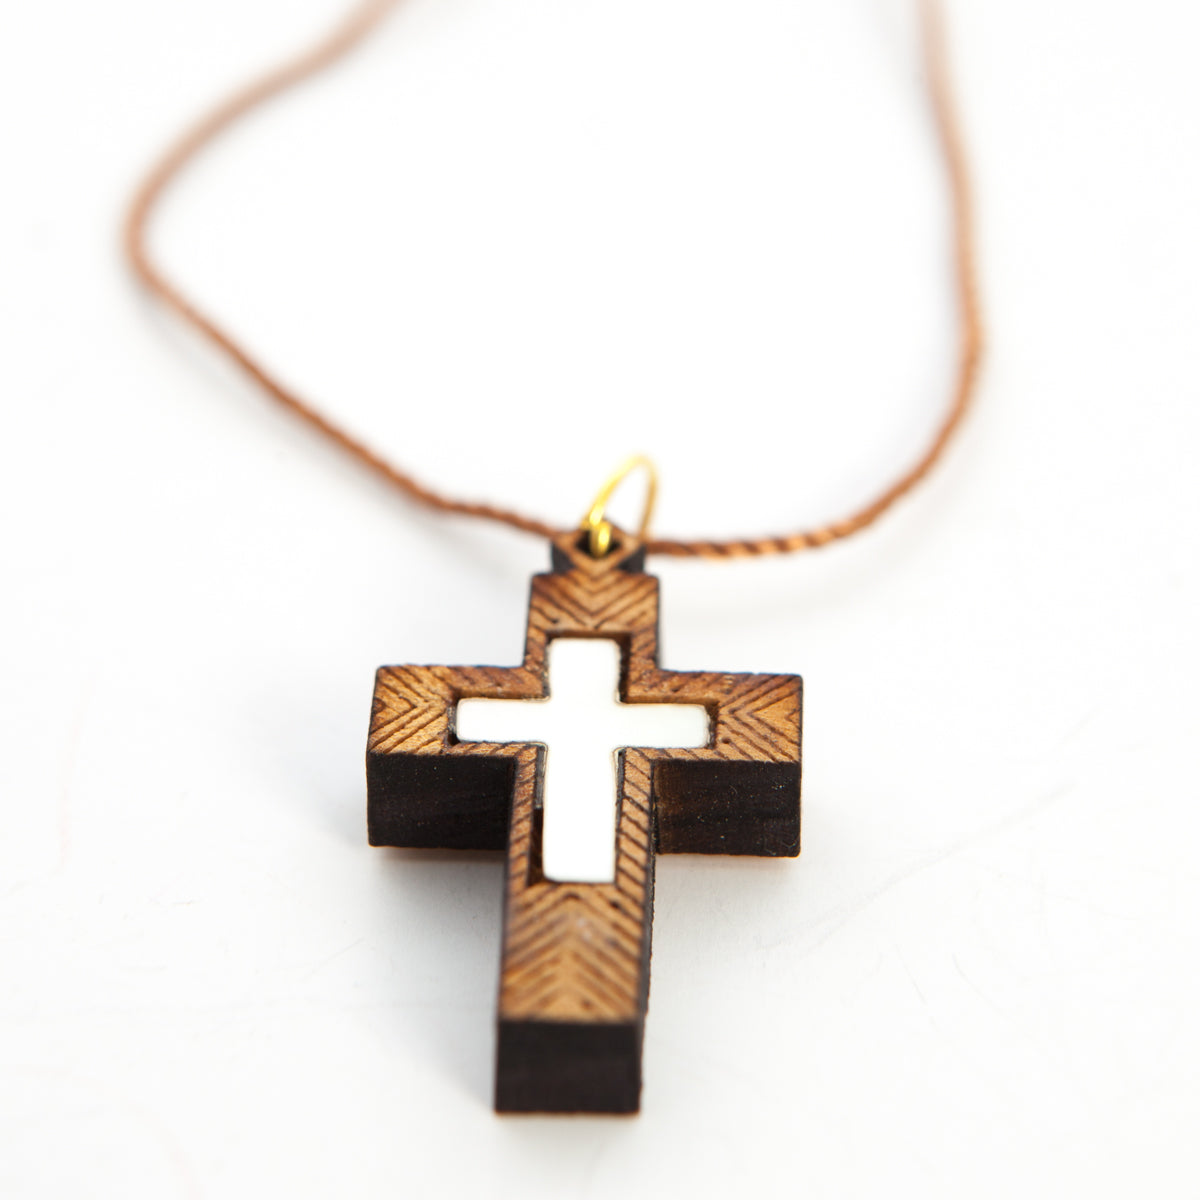 70 Pieces Small Wooden Crosses Necklace Mini Wood Cross Charms for Crafts  DIY Cr | eBay